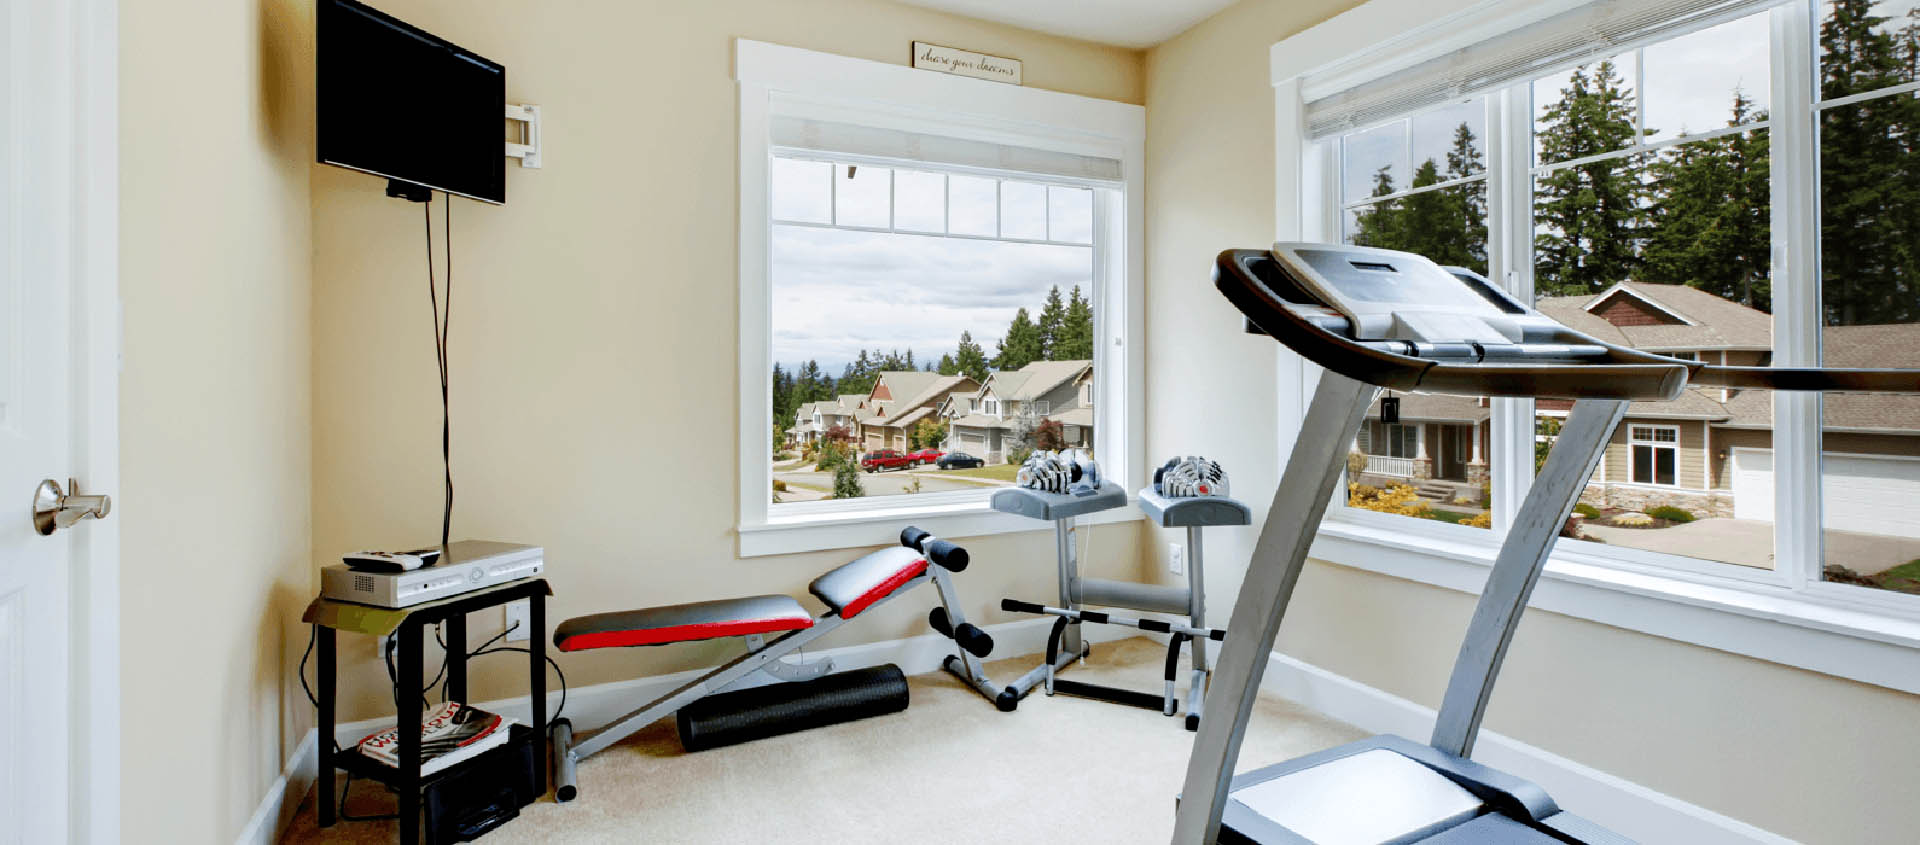 home-gym-ideas-cant-live-without-featured-image